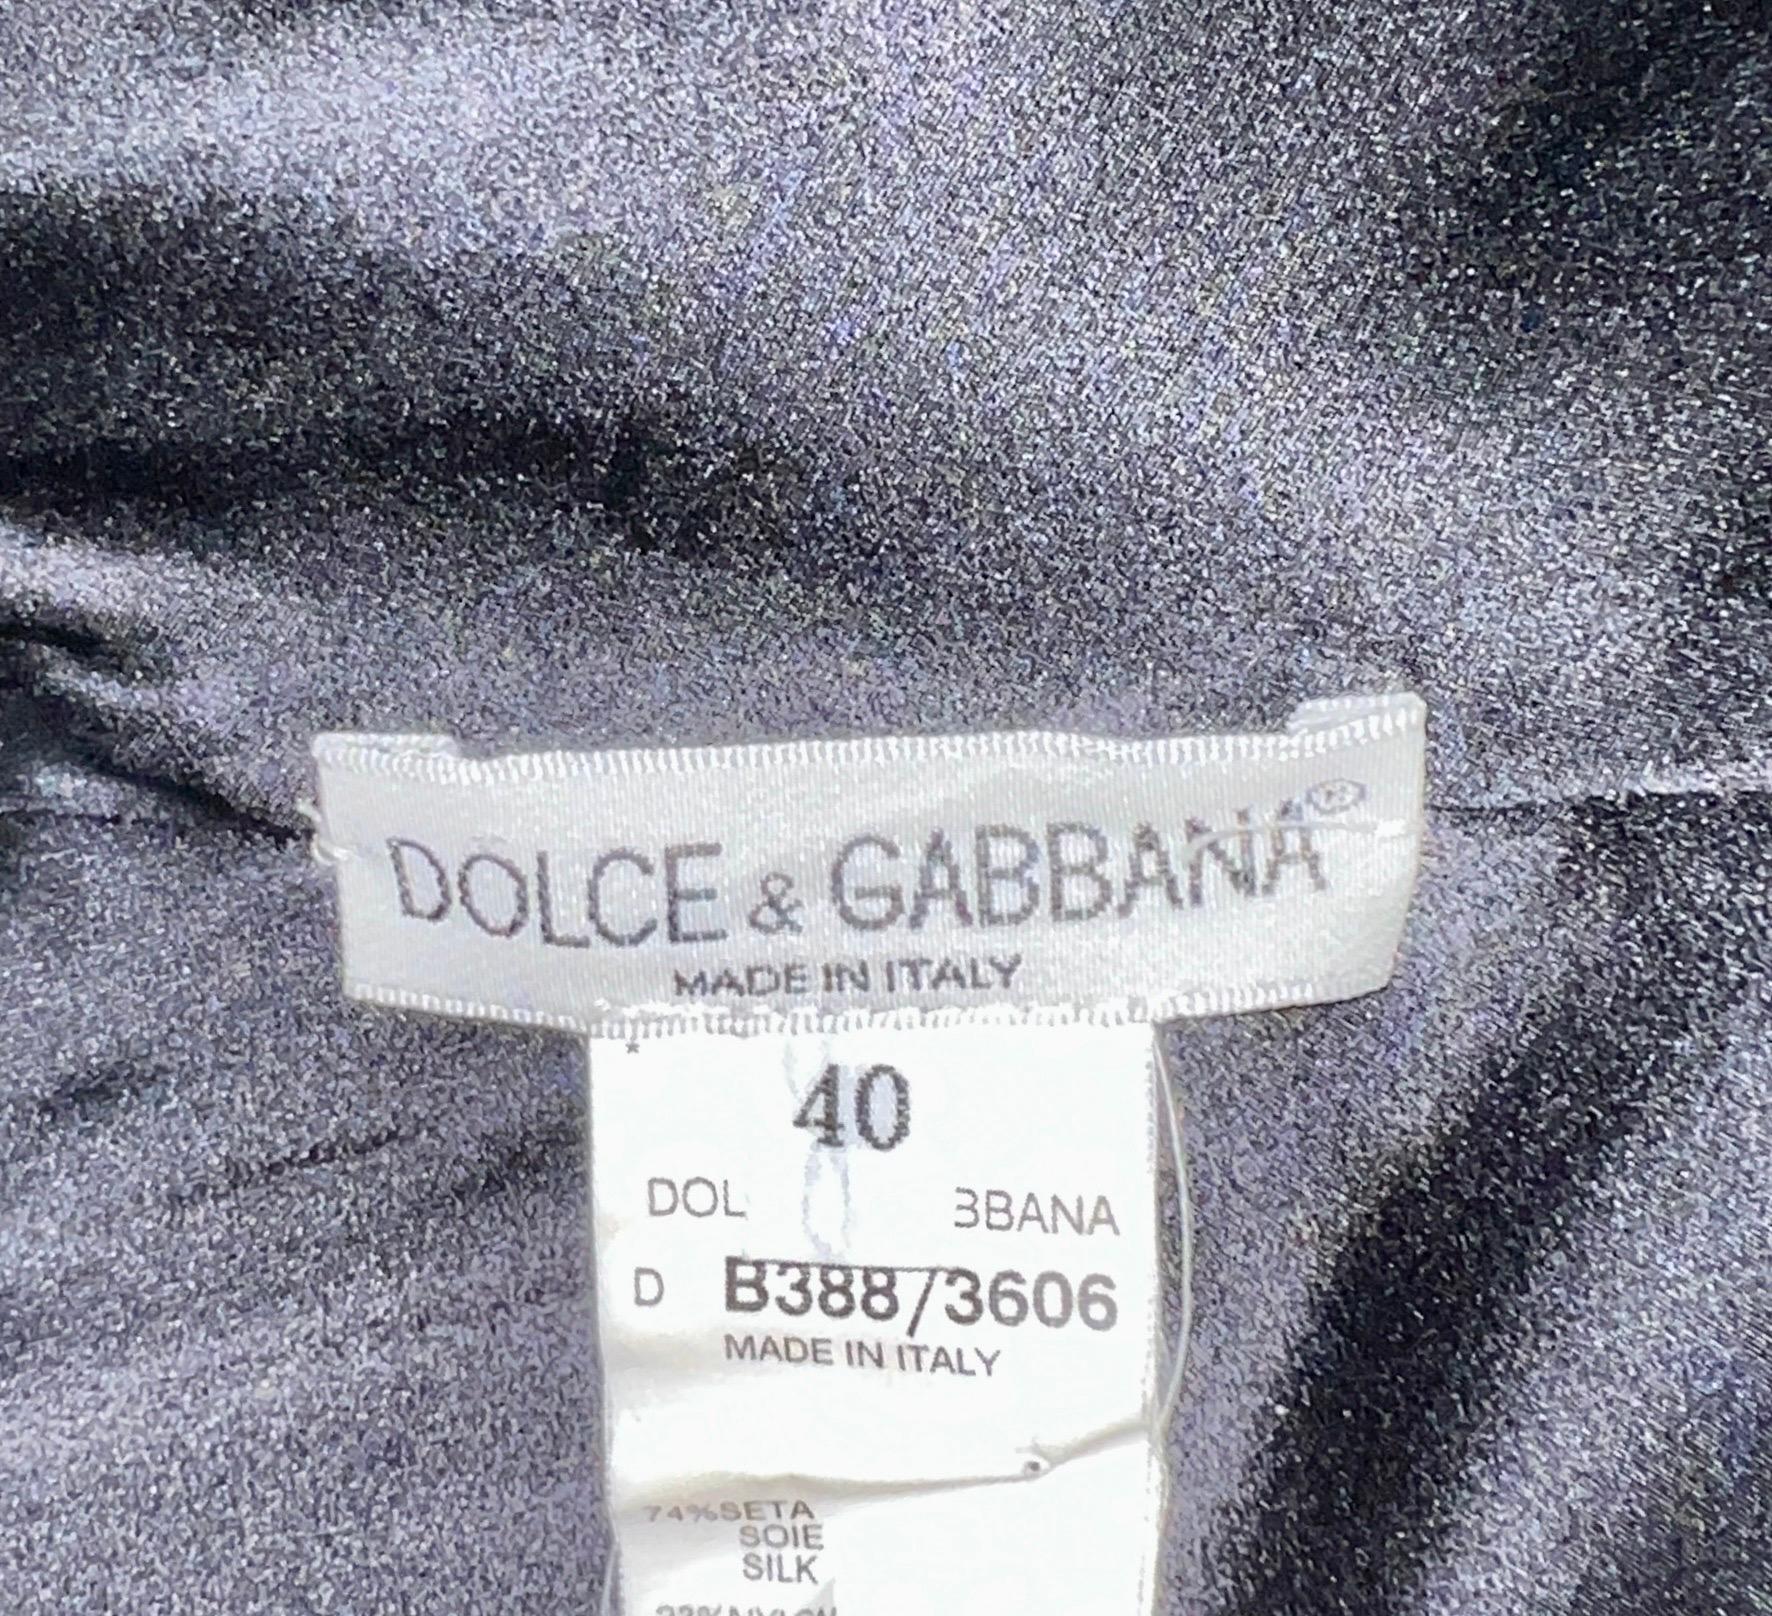 DOLCE & GABBANA 1998 Hand-Painted Print Floral Evening Dress Gown 40 For Sale 2